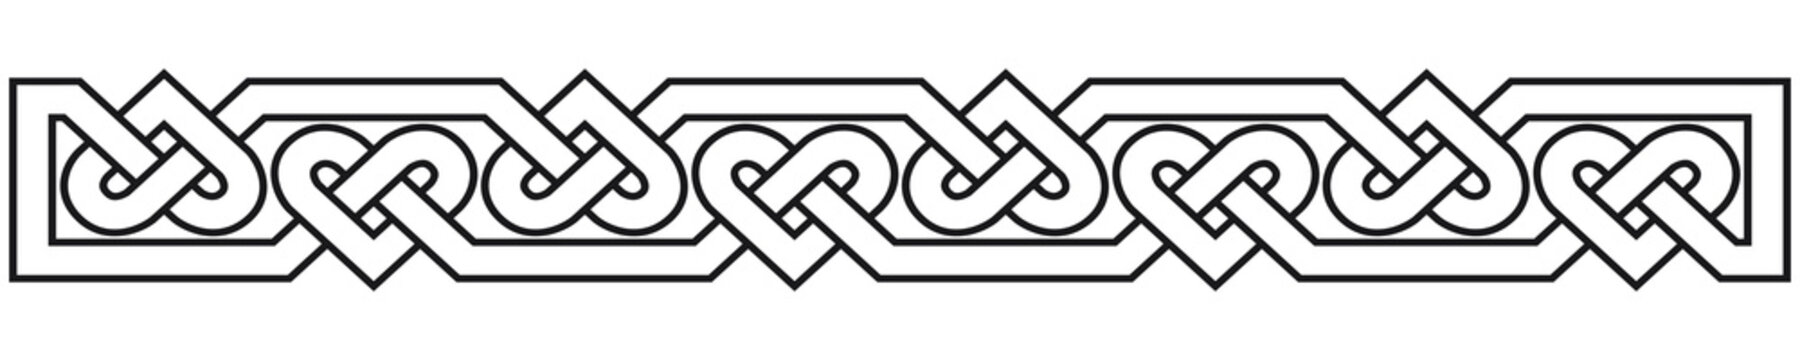 Celtic border with hearts. Linear border made with Celtic knots for use in designs for St. Patrick's Day.